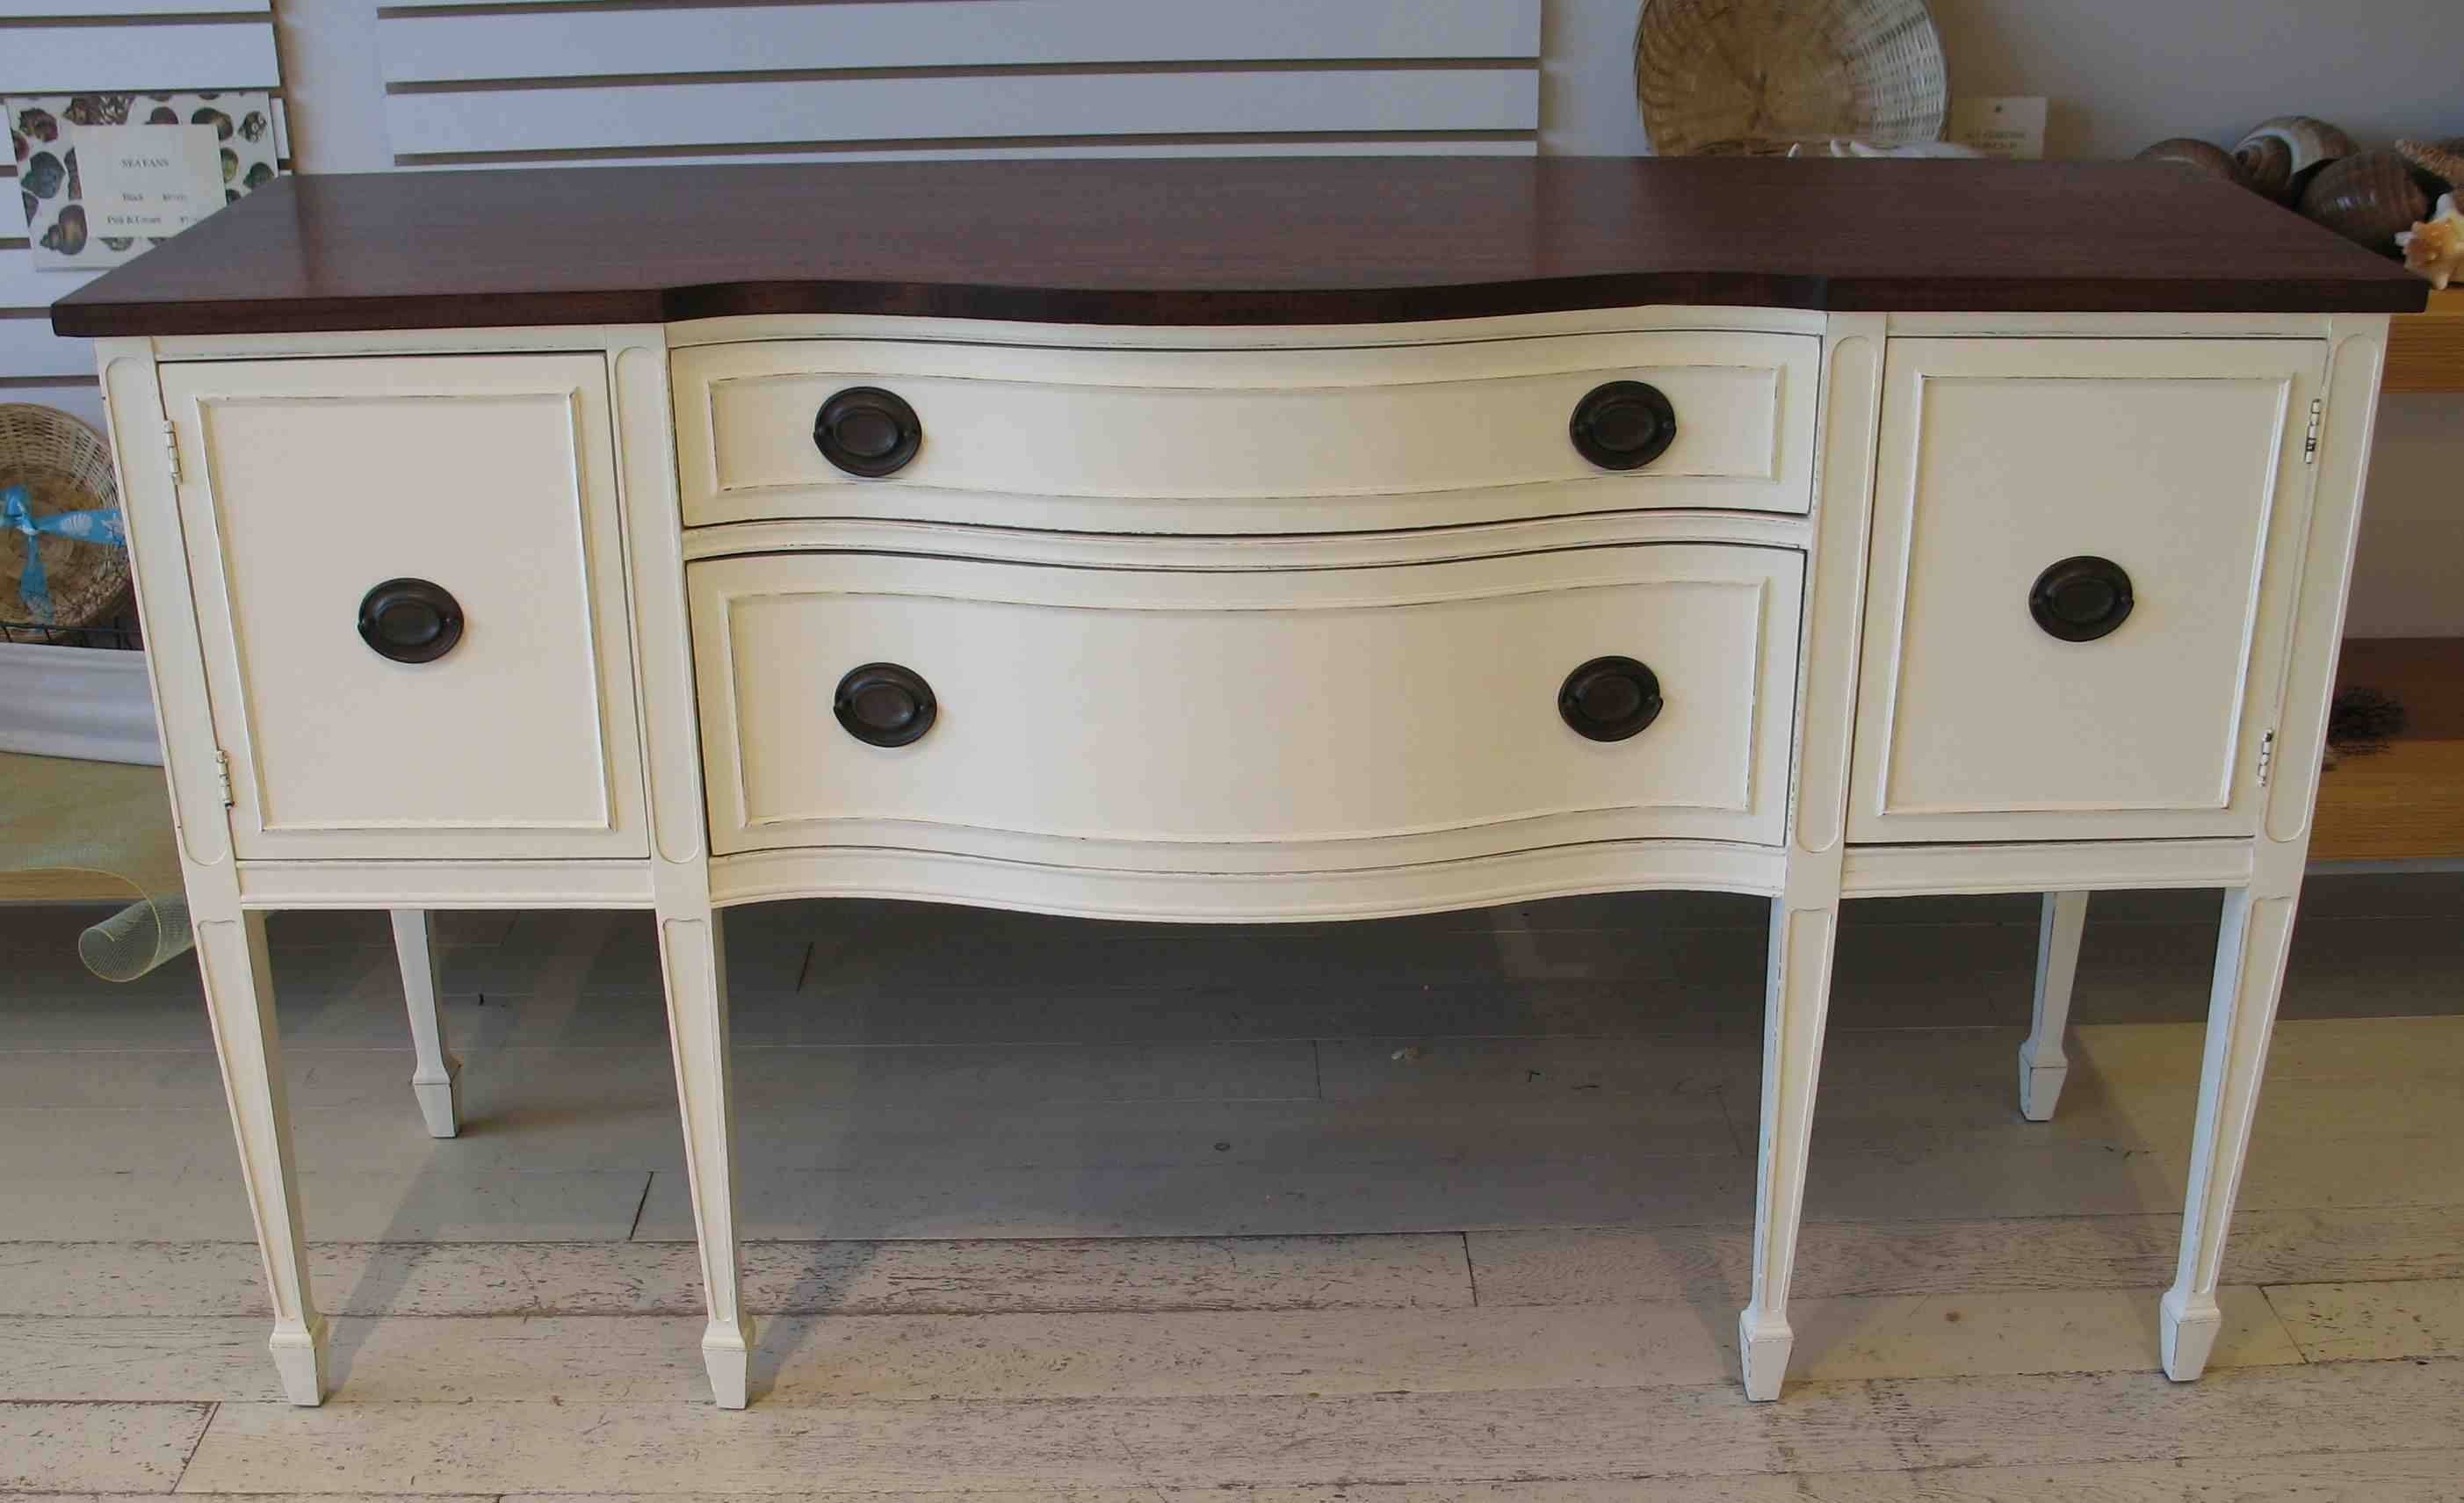 Using Old Oak Sideboard Buffet » Home Decorations Insight Regarding Painted Sideboards And Buffets (View 1 of 15)